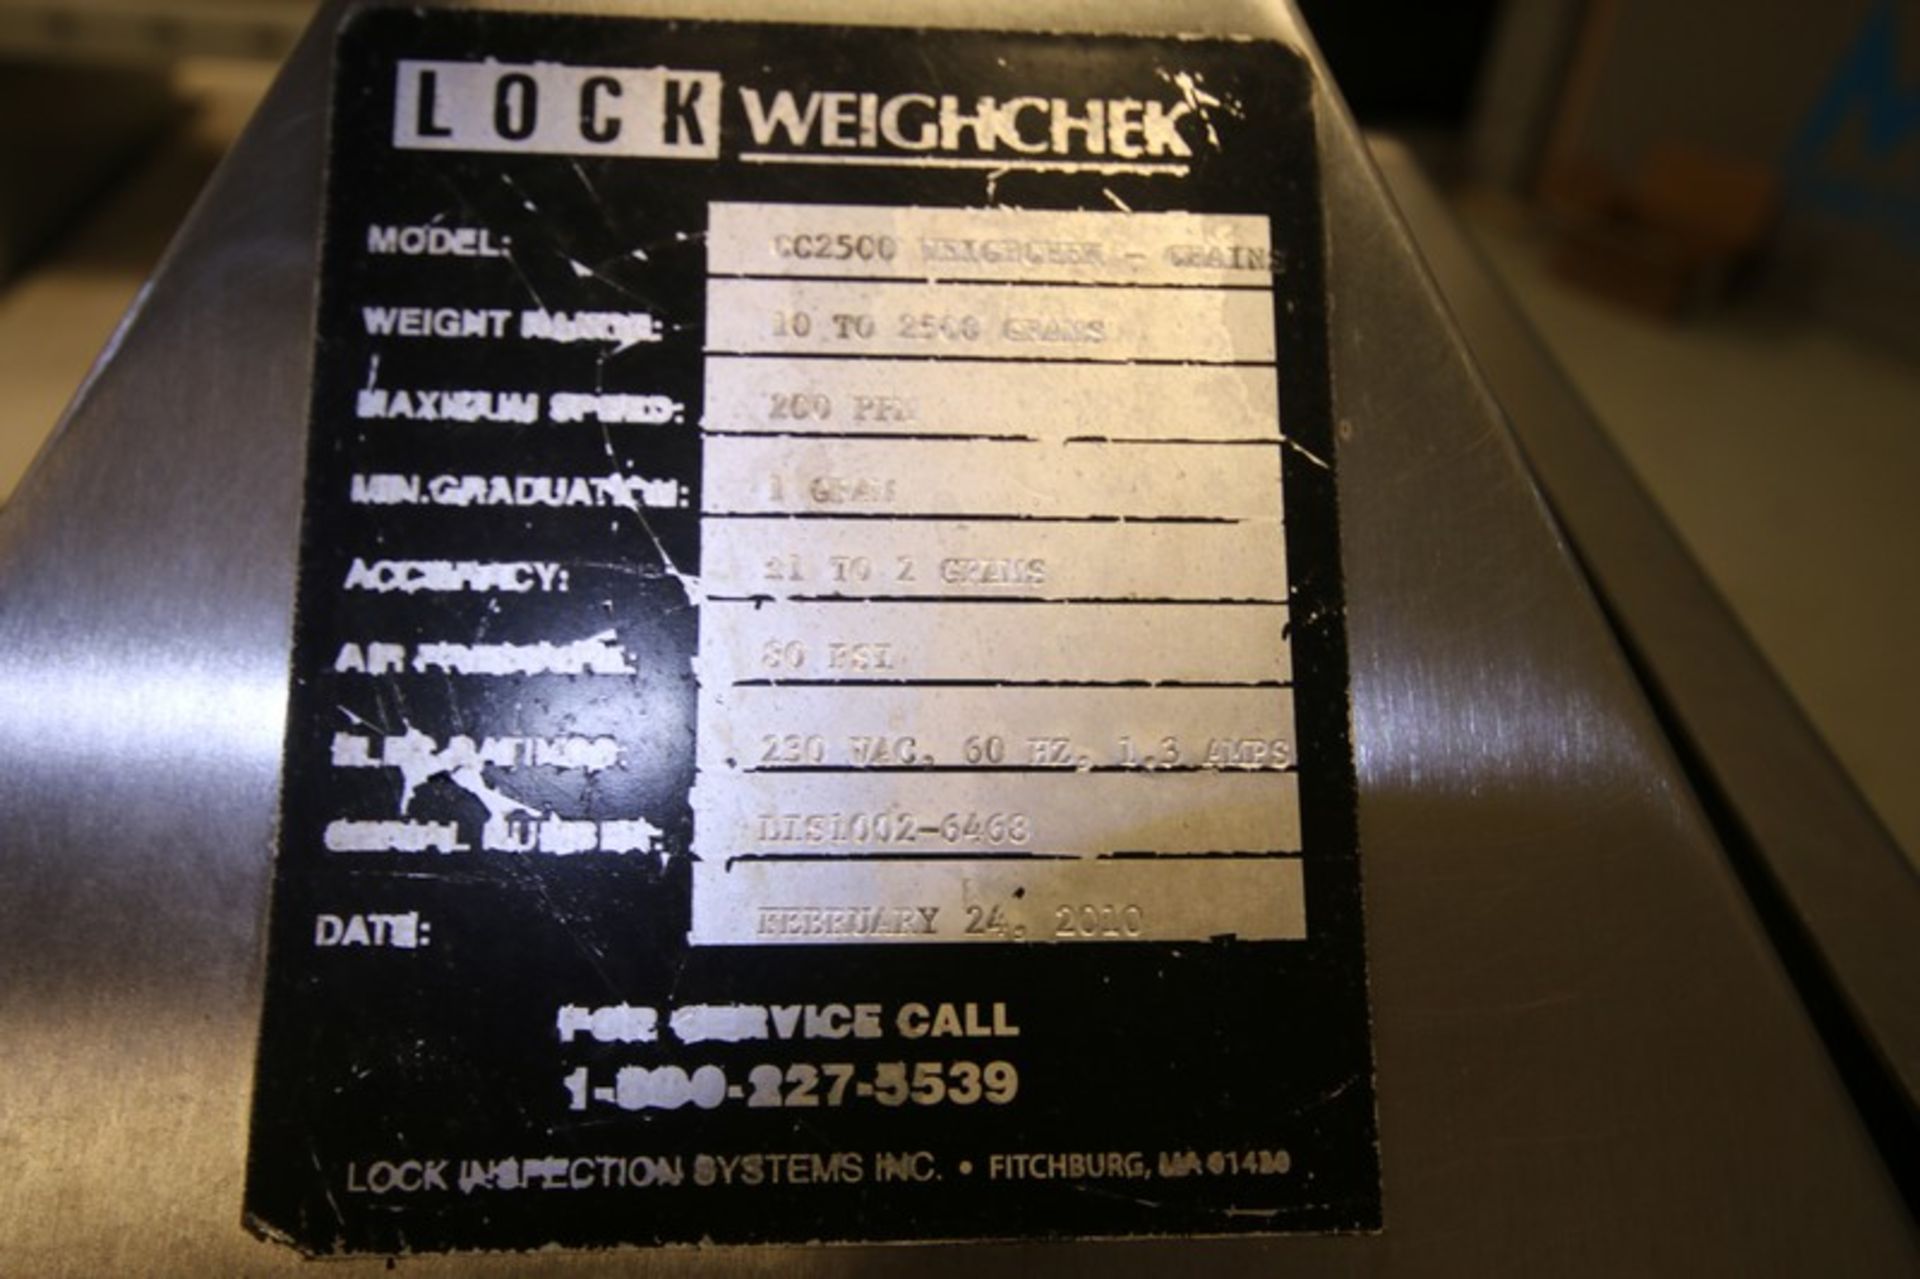 2010 Lock Weighchek S/S Metal Detector / Check-Weigher, Model CC2500 WEIGHCHECK-CHAIN, SN LIS1002- - Image 9 of 9